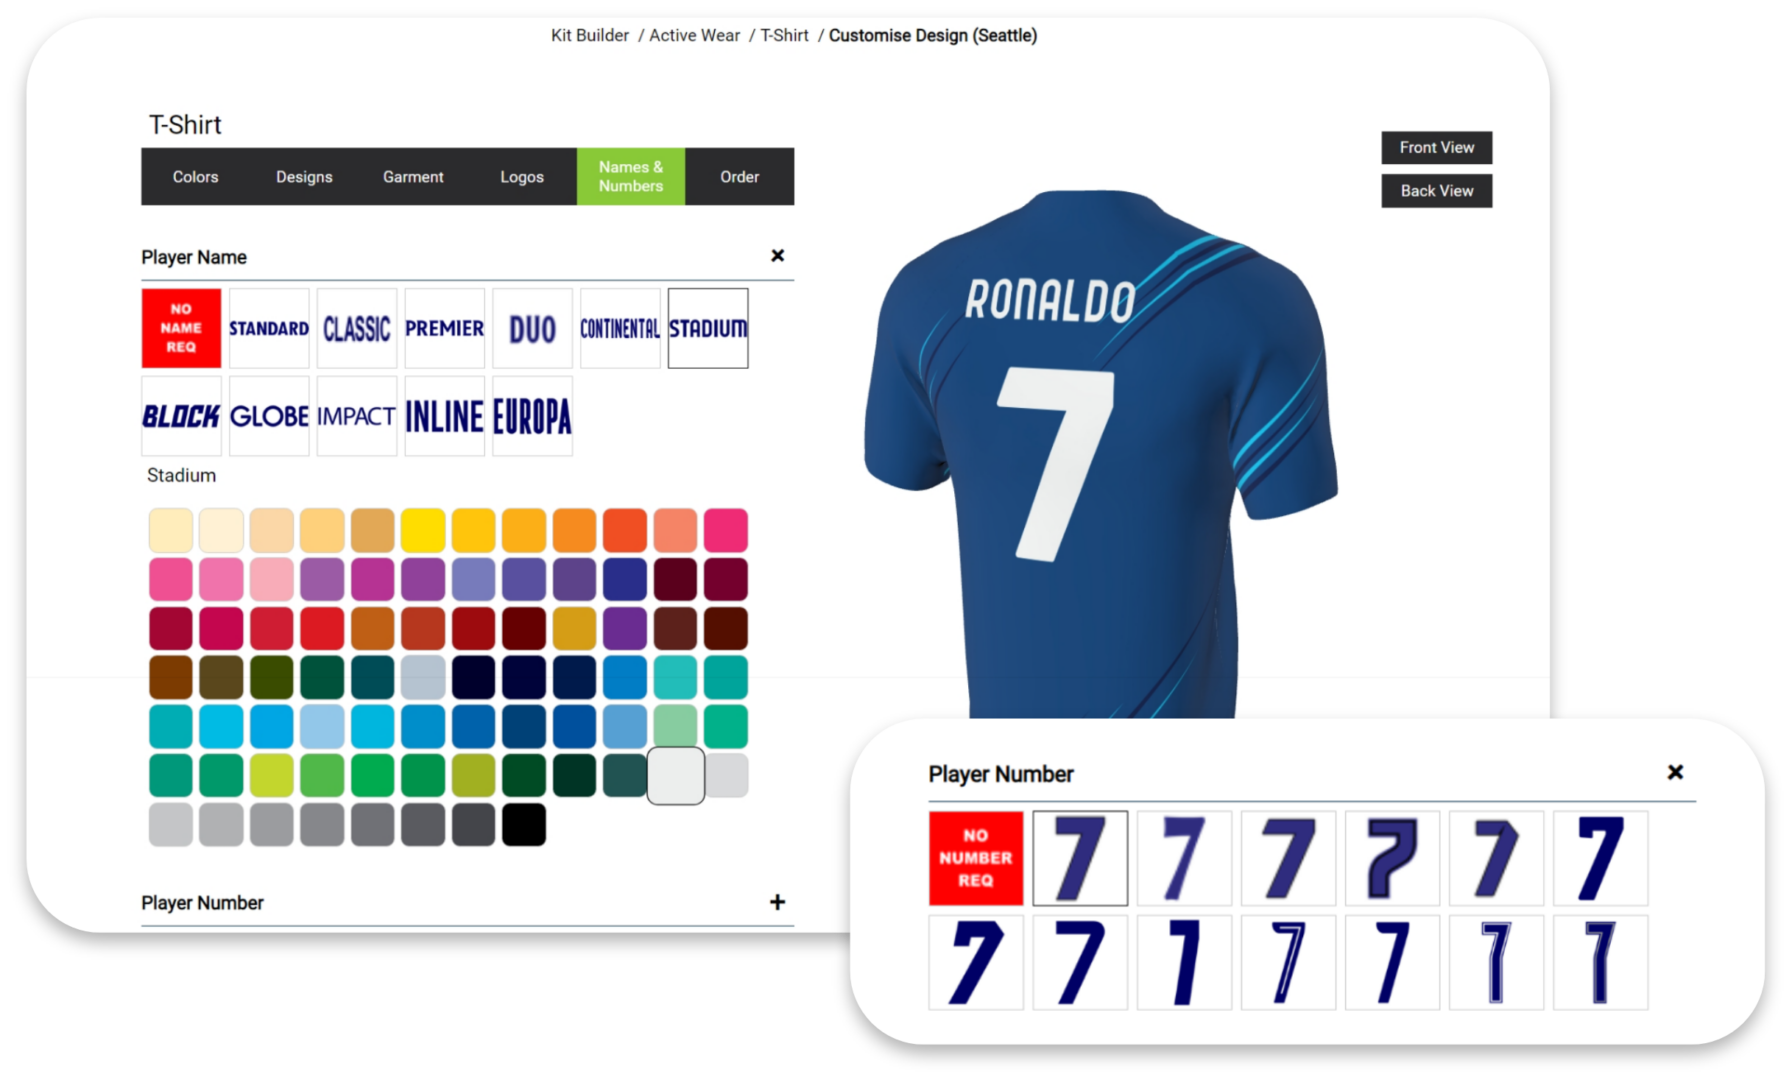 edgy sport kit builder player name and number